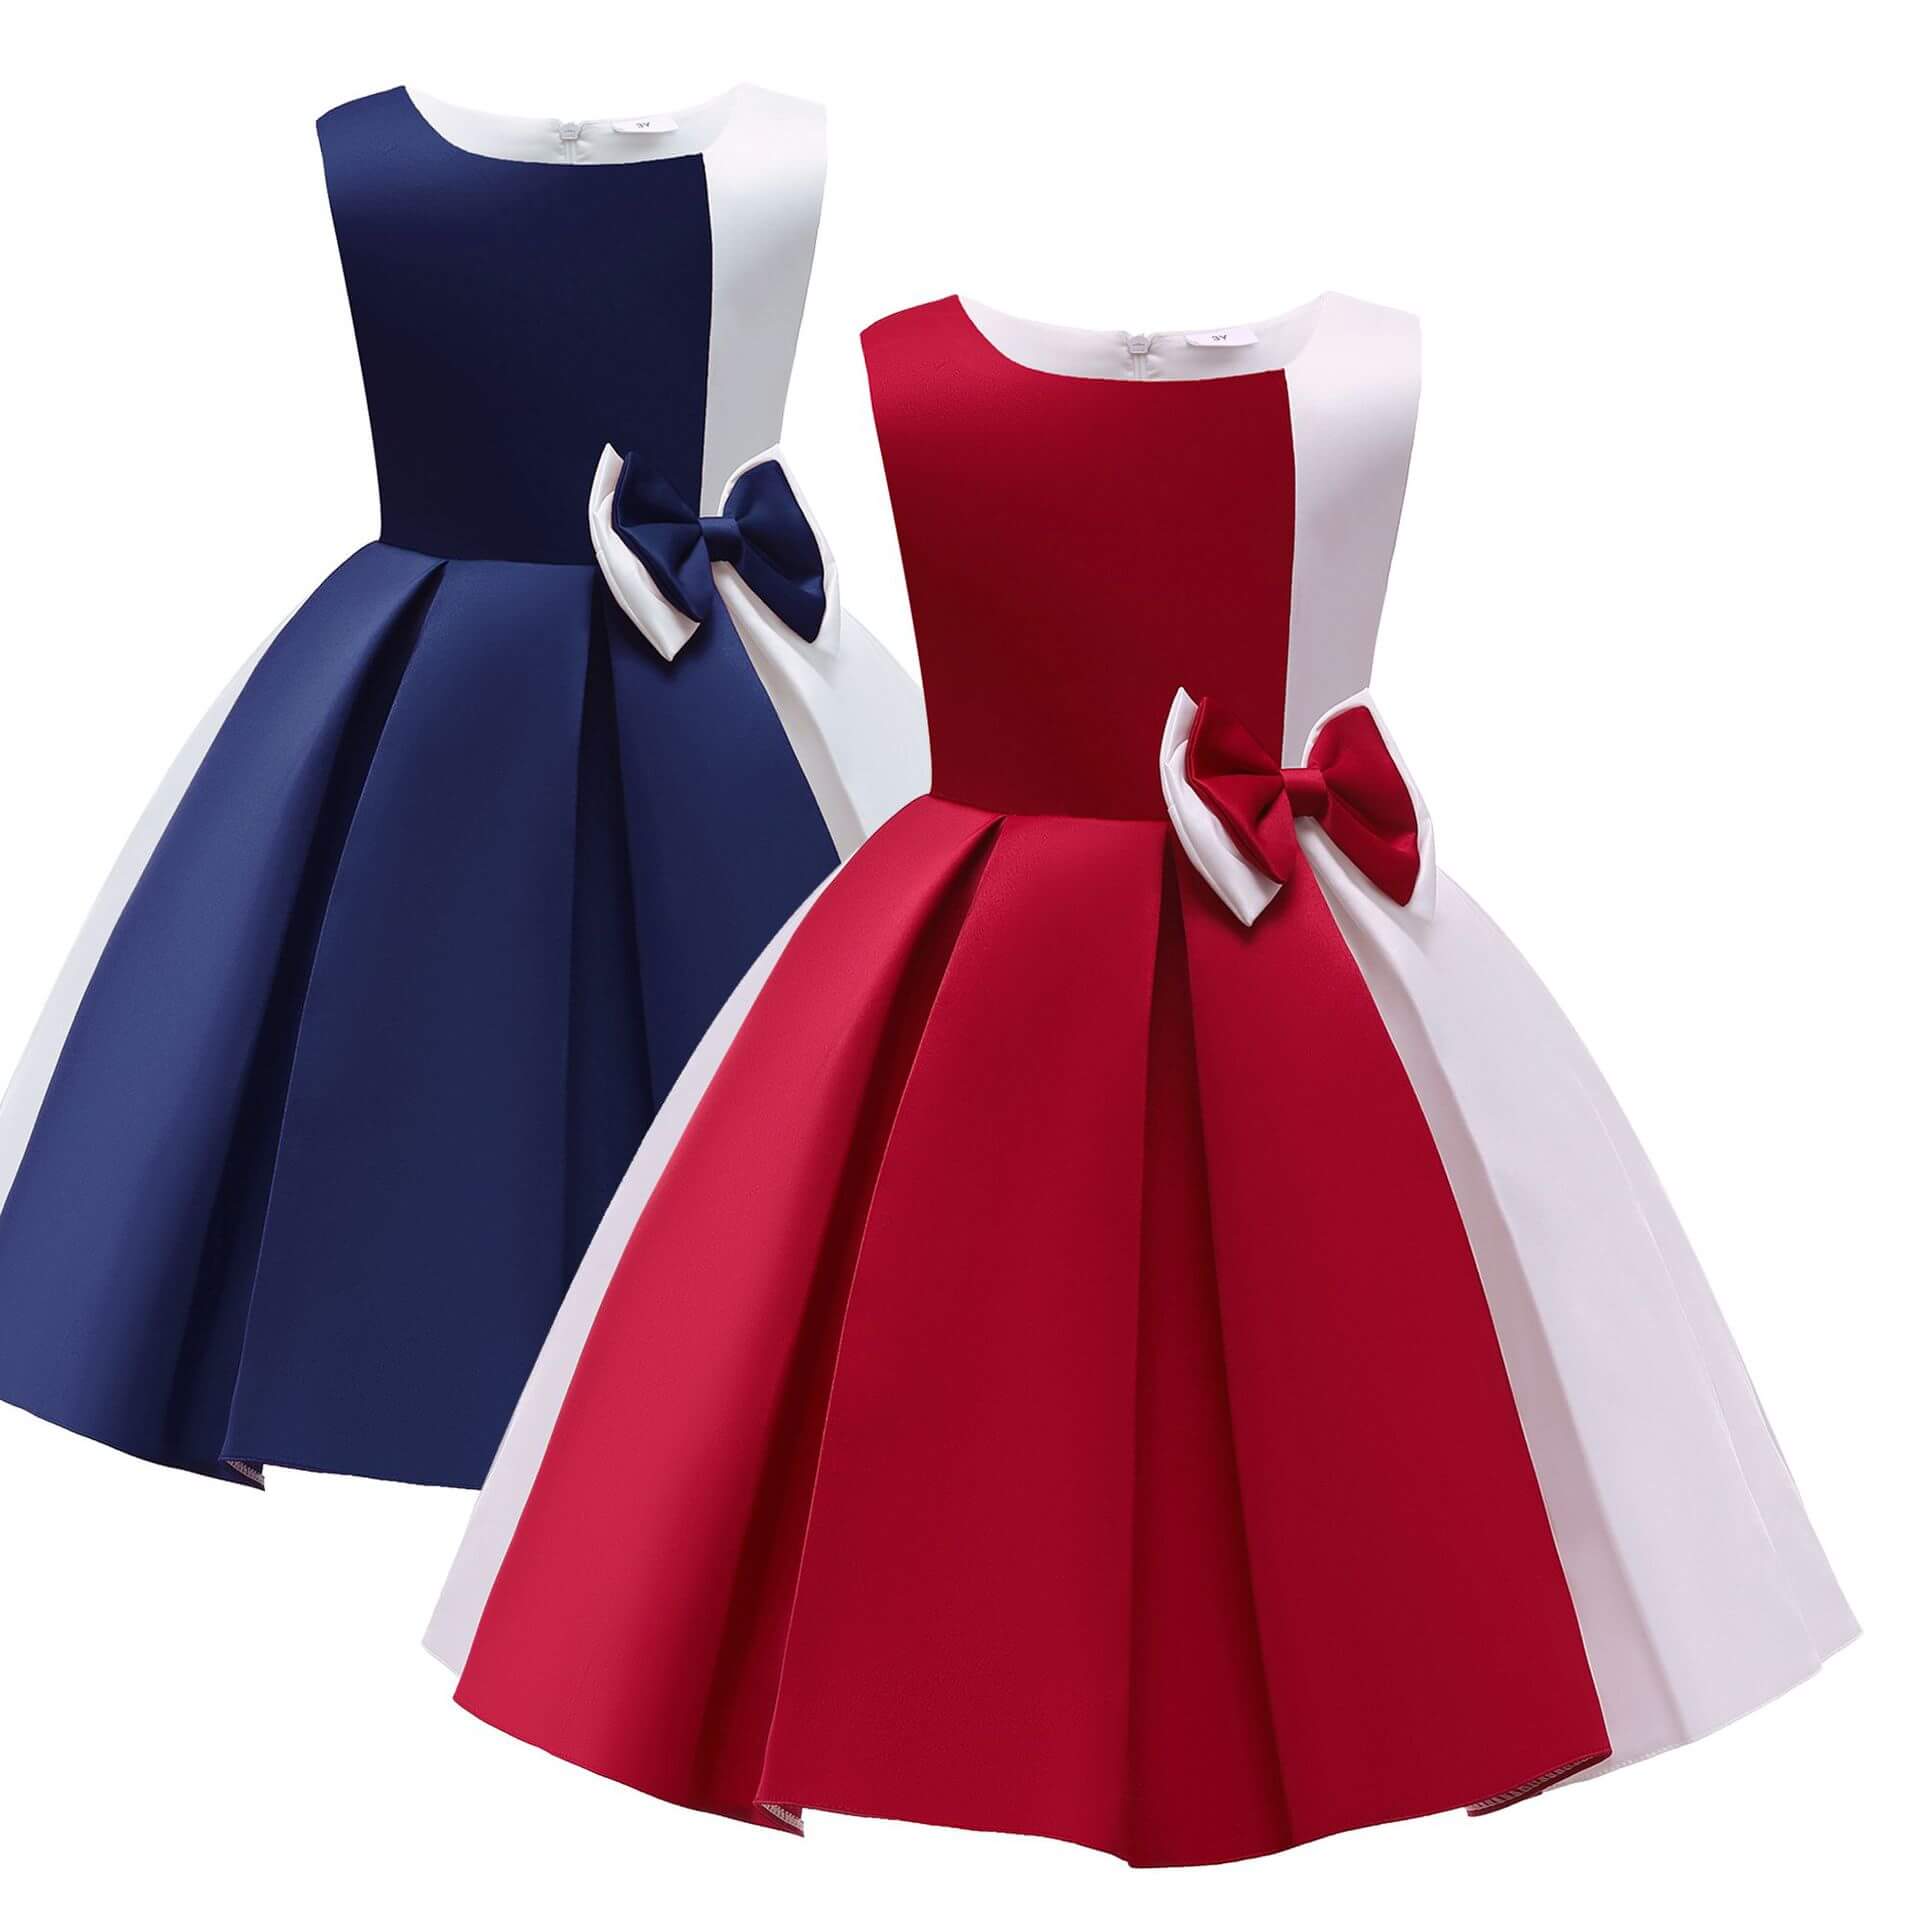 Girls Contrast Color Dress Red/White and Blue/White Two-color Contrasting Dress